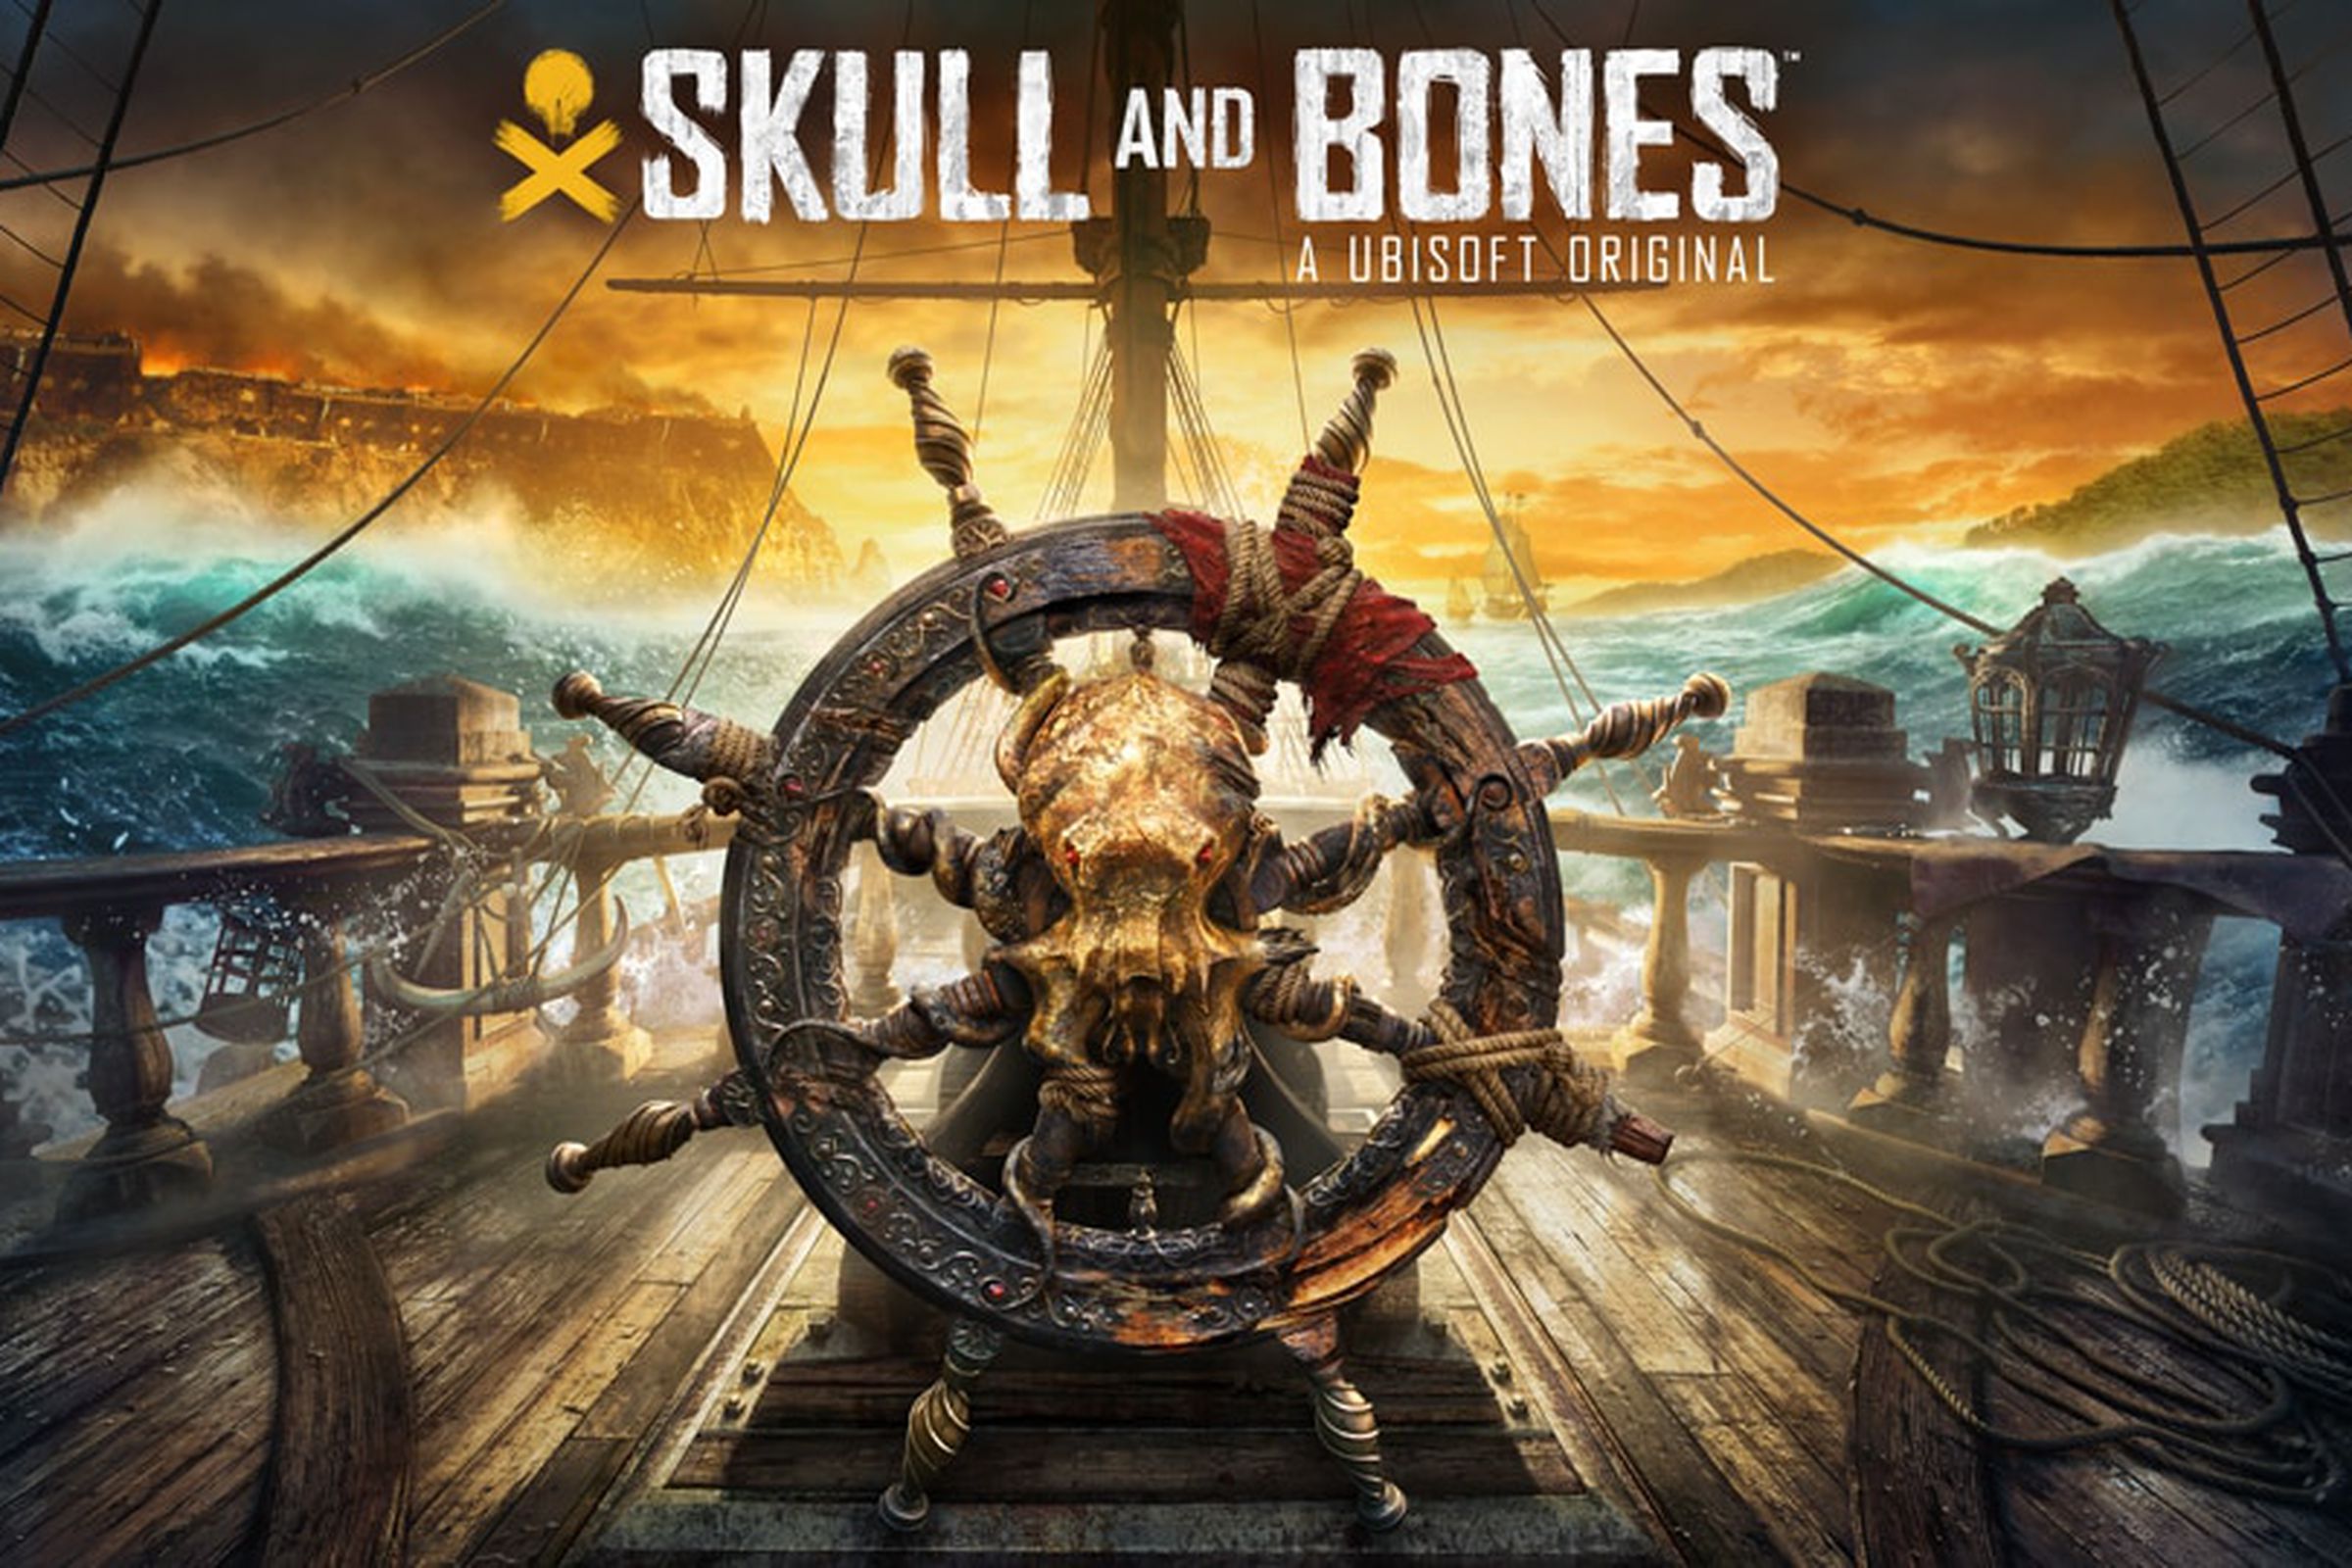 Promotional artwork for Ubisoft’s Skull and Bones featuring an image of a ship’s navigation wheel adorned with the skull of a deep sea creature with the words “Skull and Bones, an Ubisoft Original” overhead